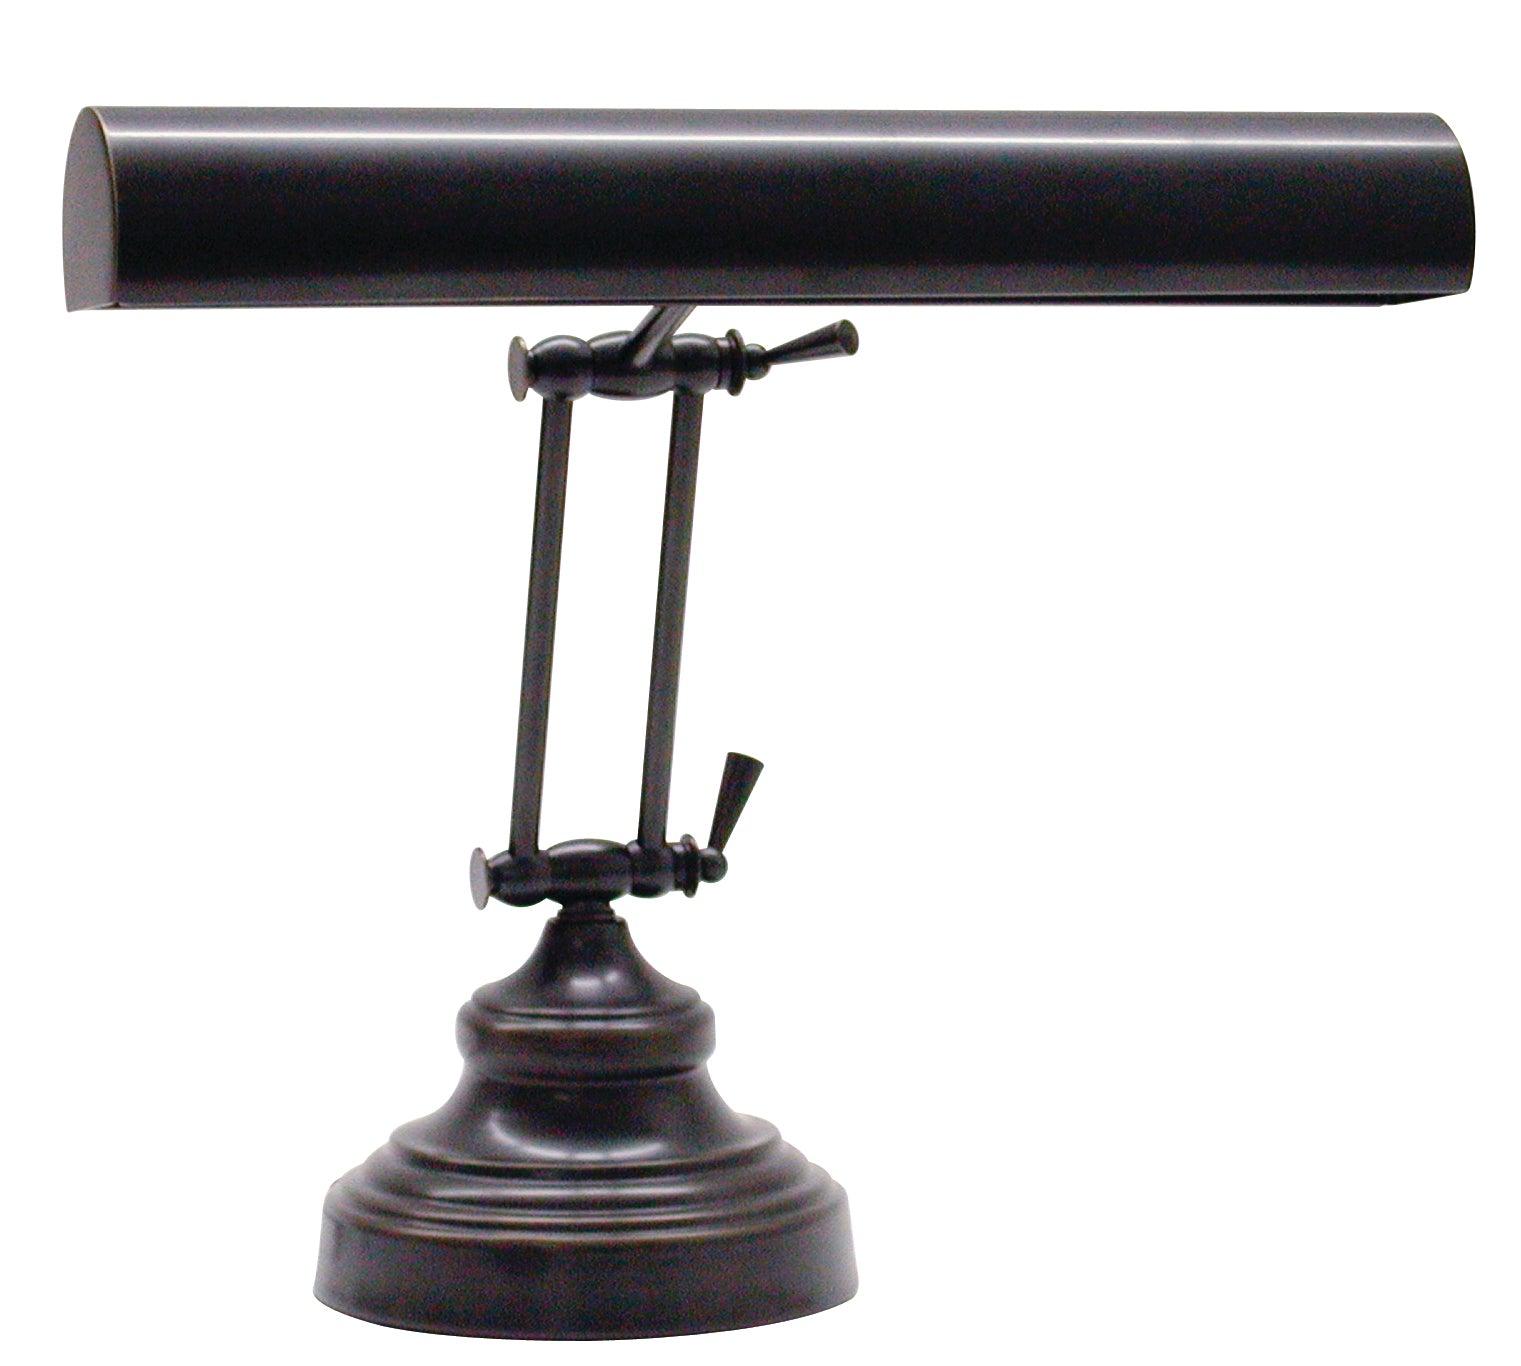 House of Troy Advent 14" Oil Rubbed Bronze Piano Desk Lamp AP14-41-91